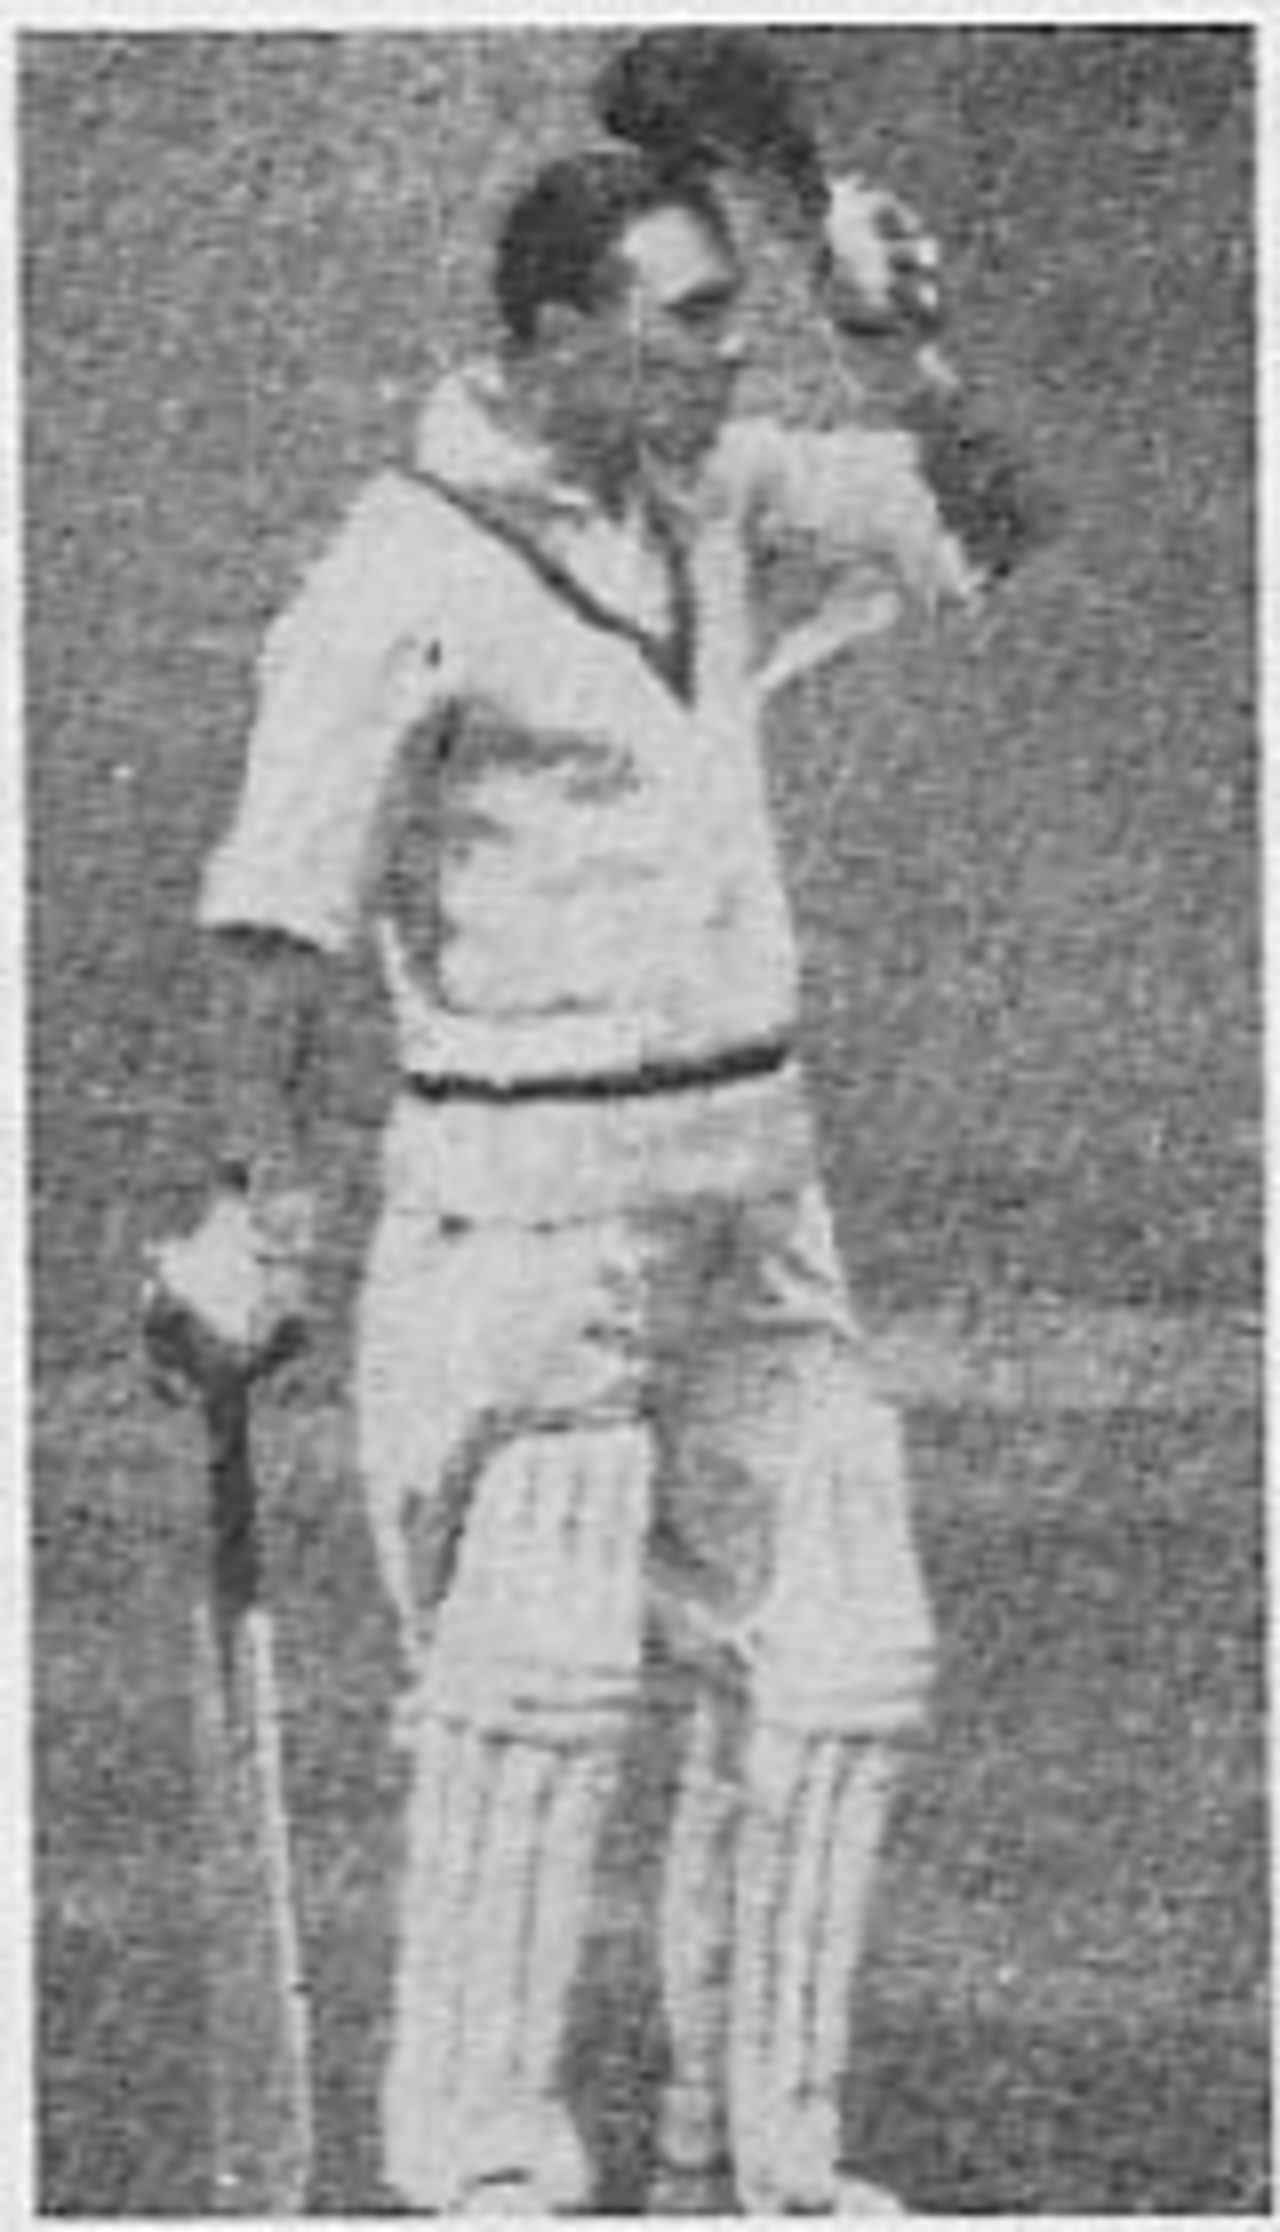 Three weeks after scoring 202 not out in Kent's 803 for 4 against Essex, Les Ames finds himself acknowledging the applause at Lord's for his century against Australia in 1934, the first by a regular wicketkeeper in an Ashes Test

